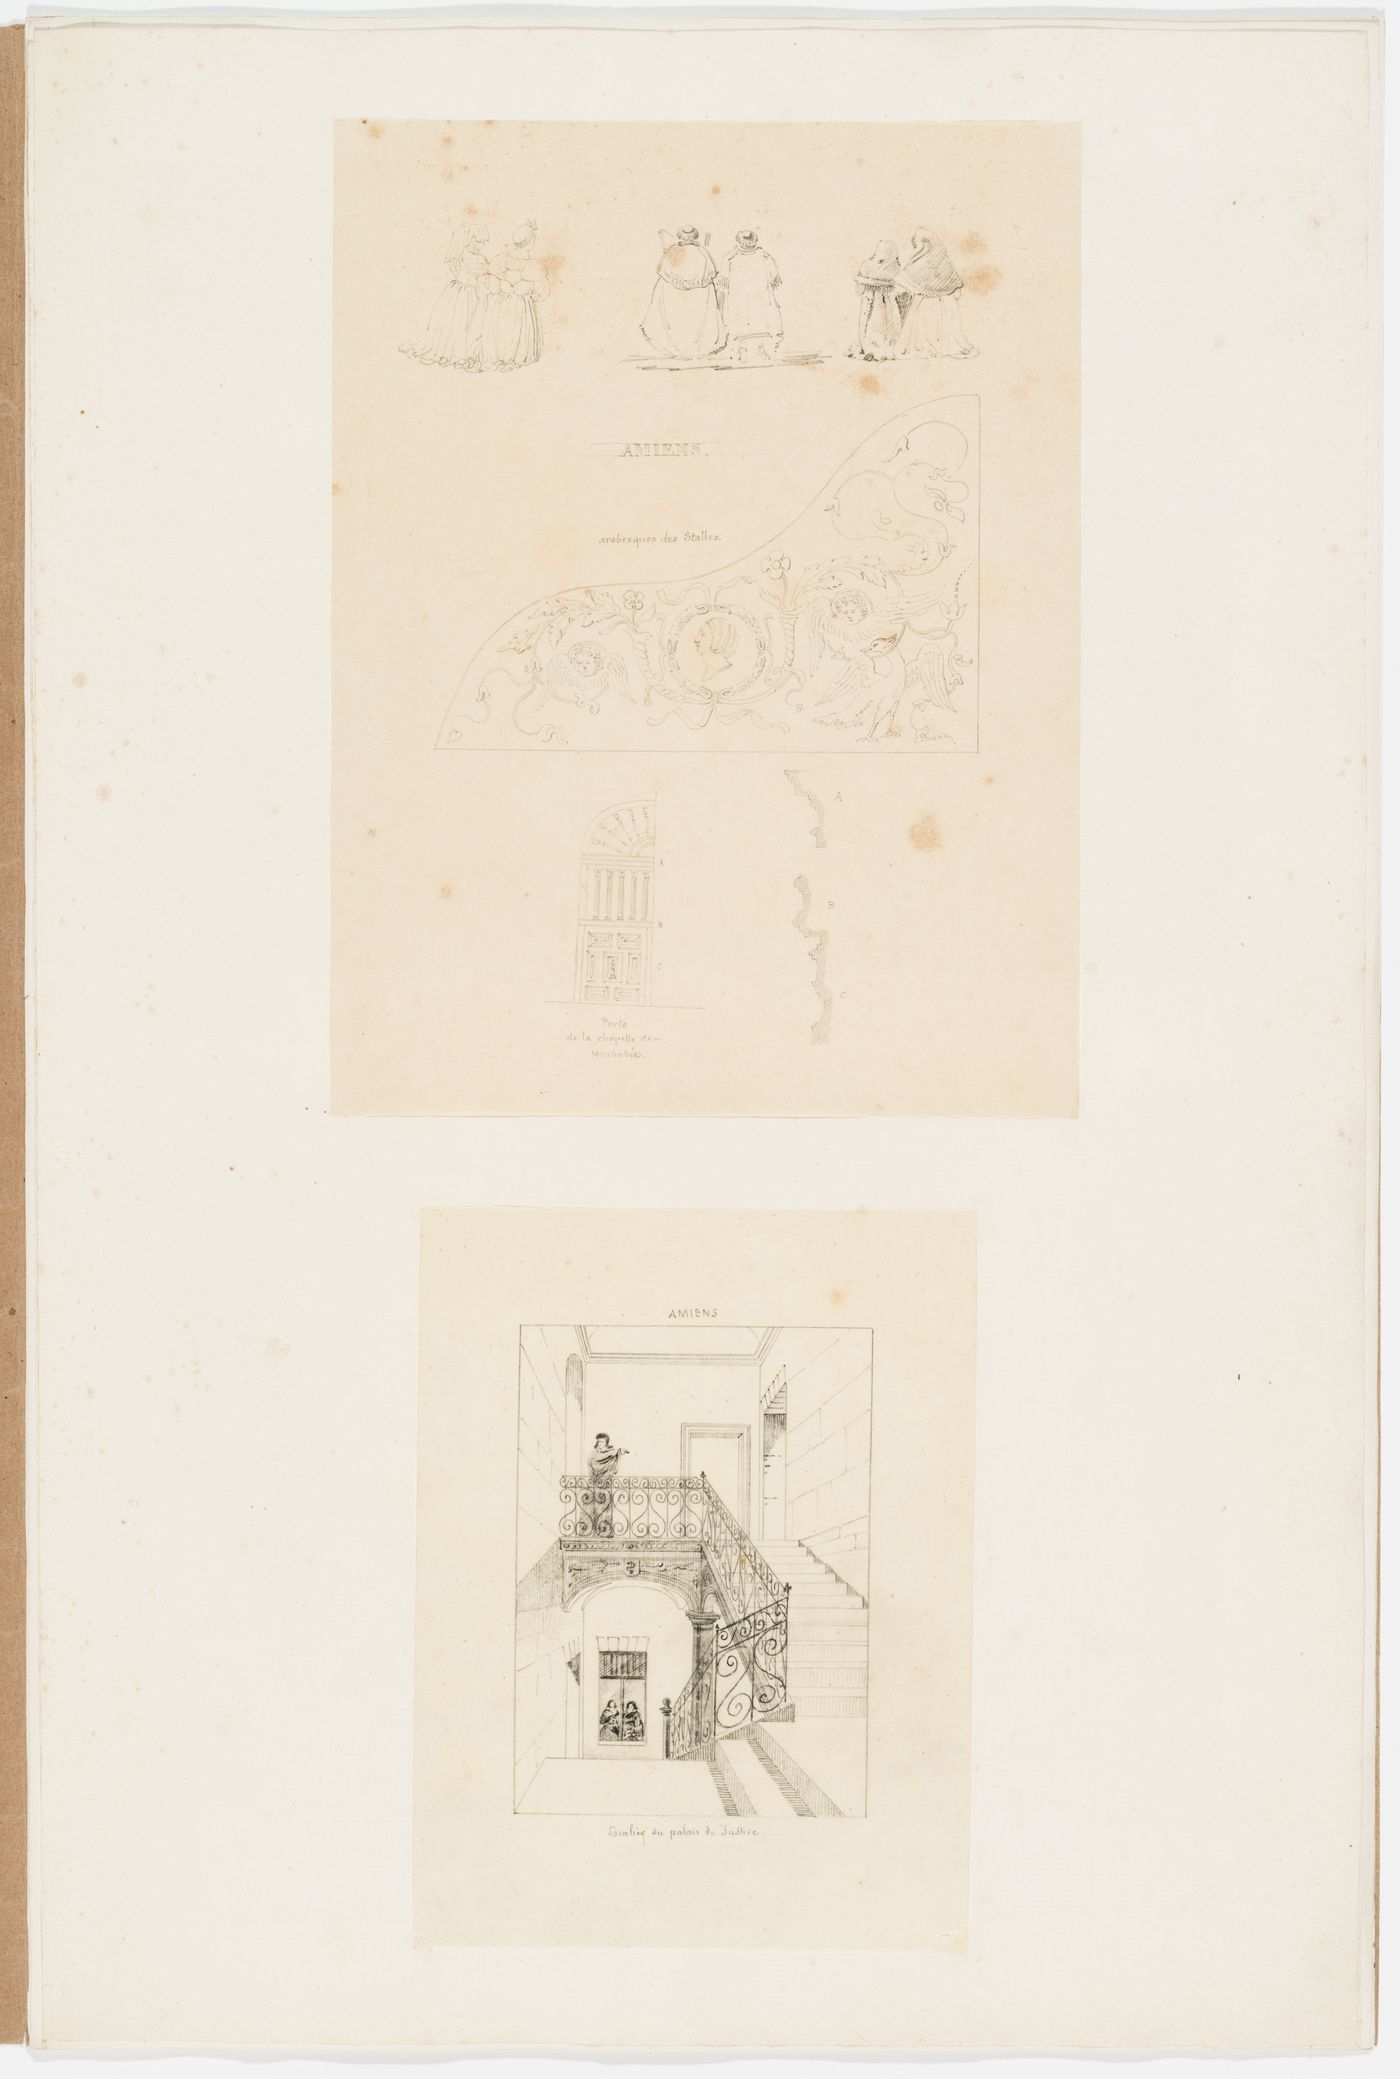 Elevation and profile of a door from the Chapelle des Macchabées, Cathédrale d'Amiens; Arabesques from the choir stalls of Cathédrale d'Amiens, with drawings of figures; Partial interior elevation of the main staircase of the Palais de Justice, Amiens